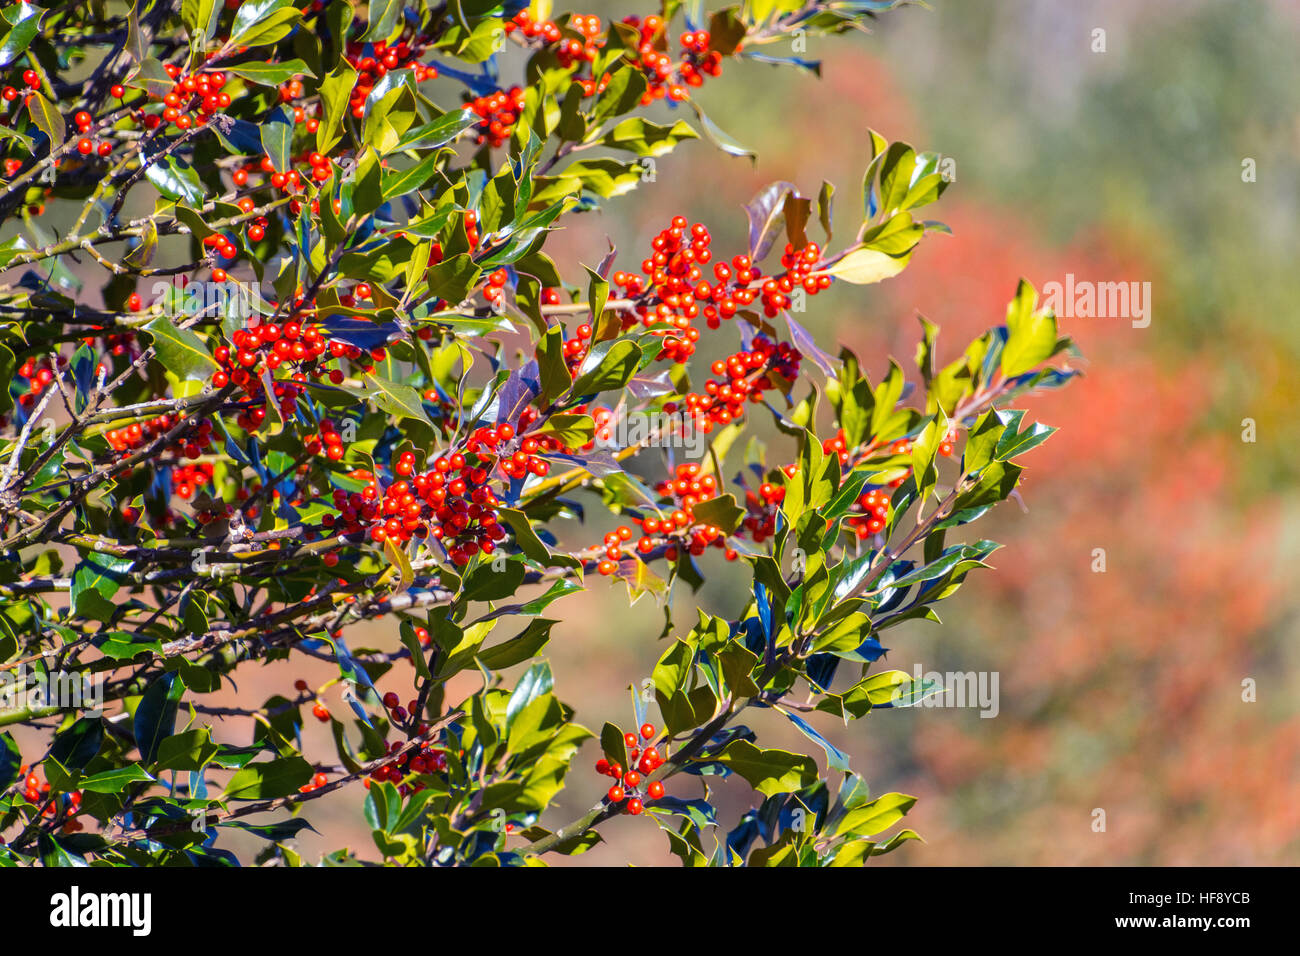 Holly leaves and red berries against red backdrop Stock Photo